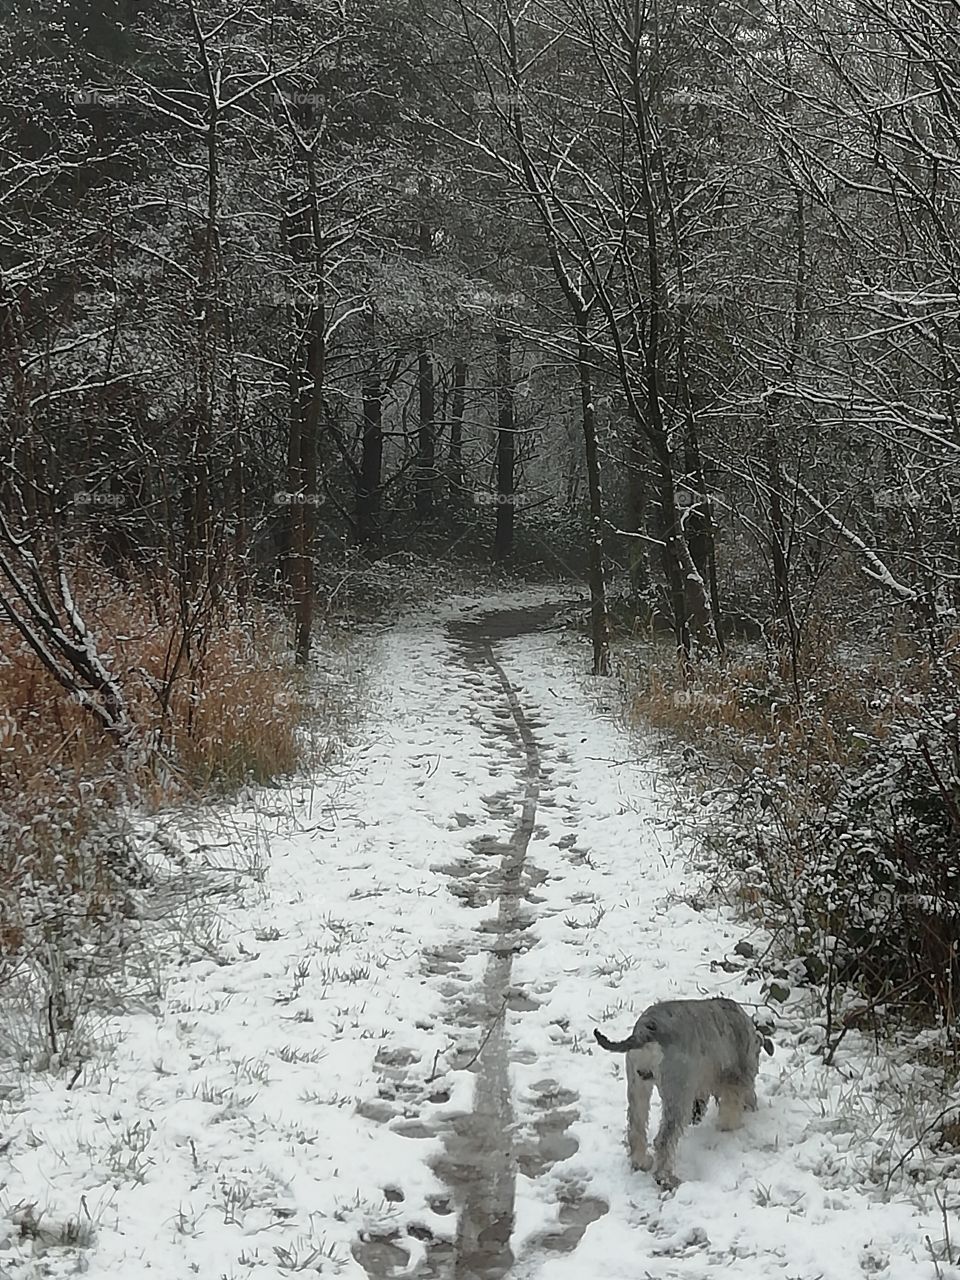 into the woods with my dog.